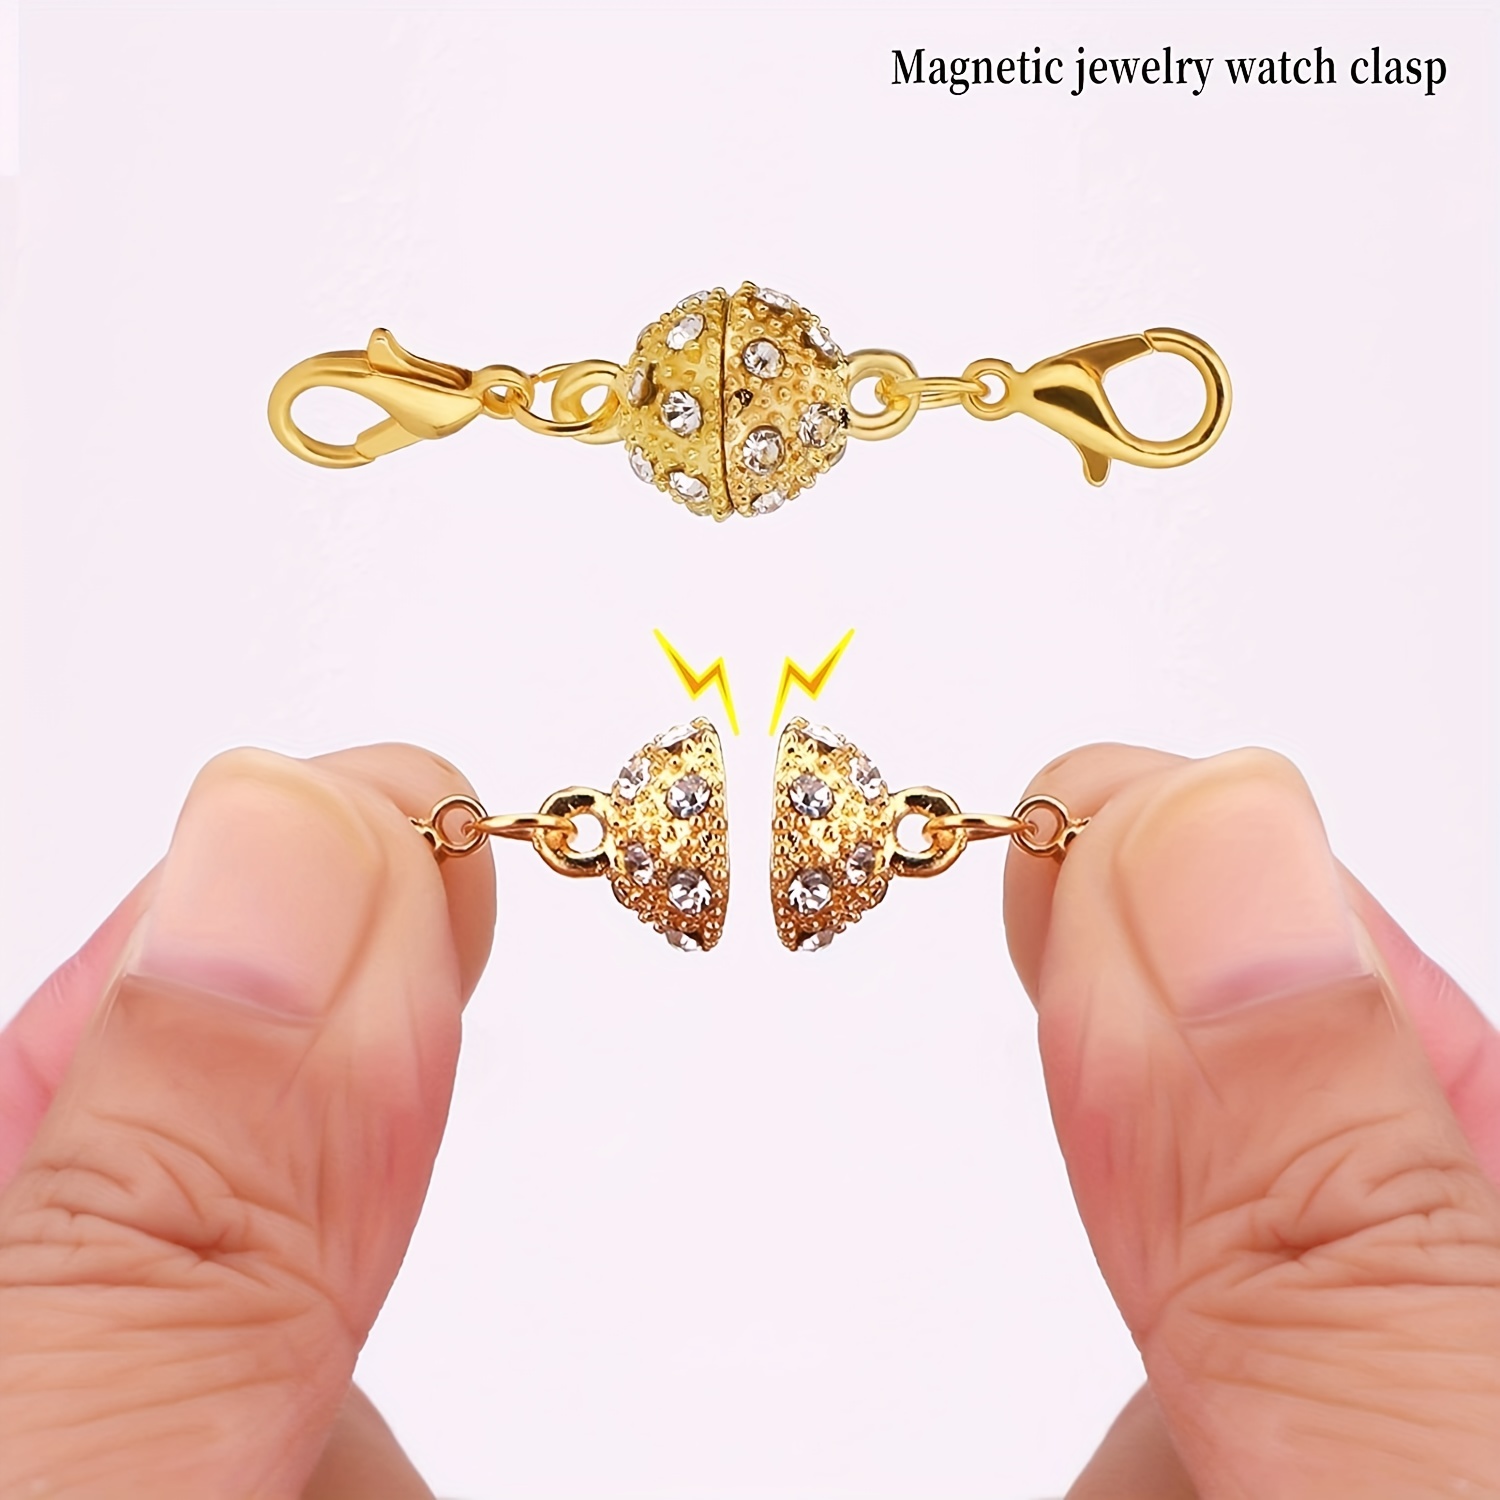 12 Pcs Necklace Clasp Magnetic Jewelry Locking Clasps And Closures Bracelet  Extender For Jewelry Making